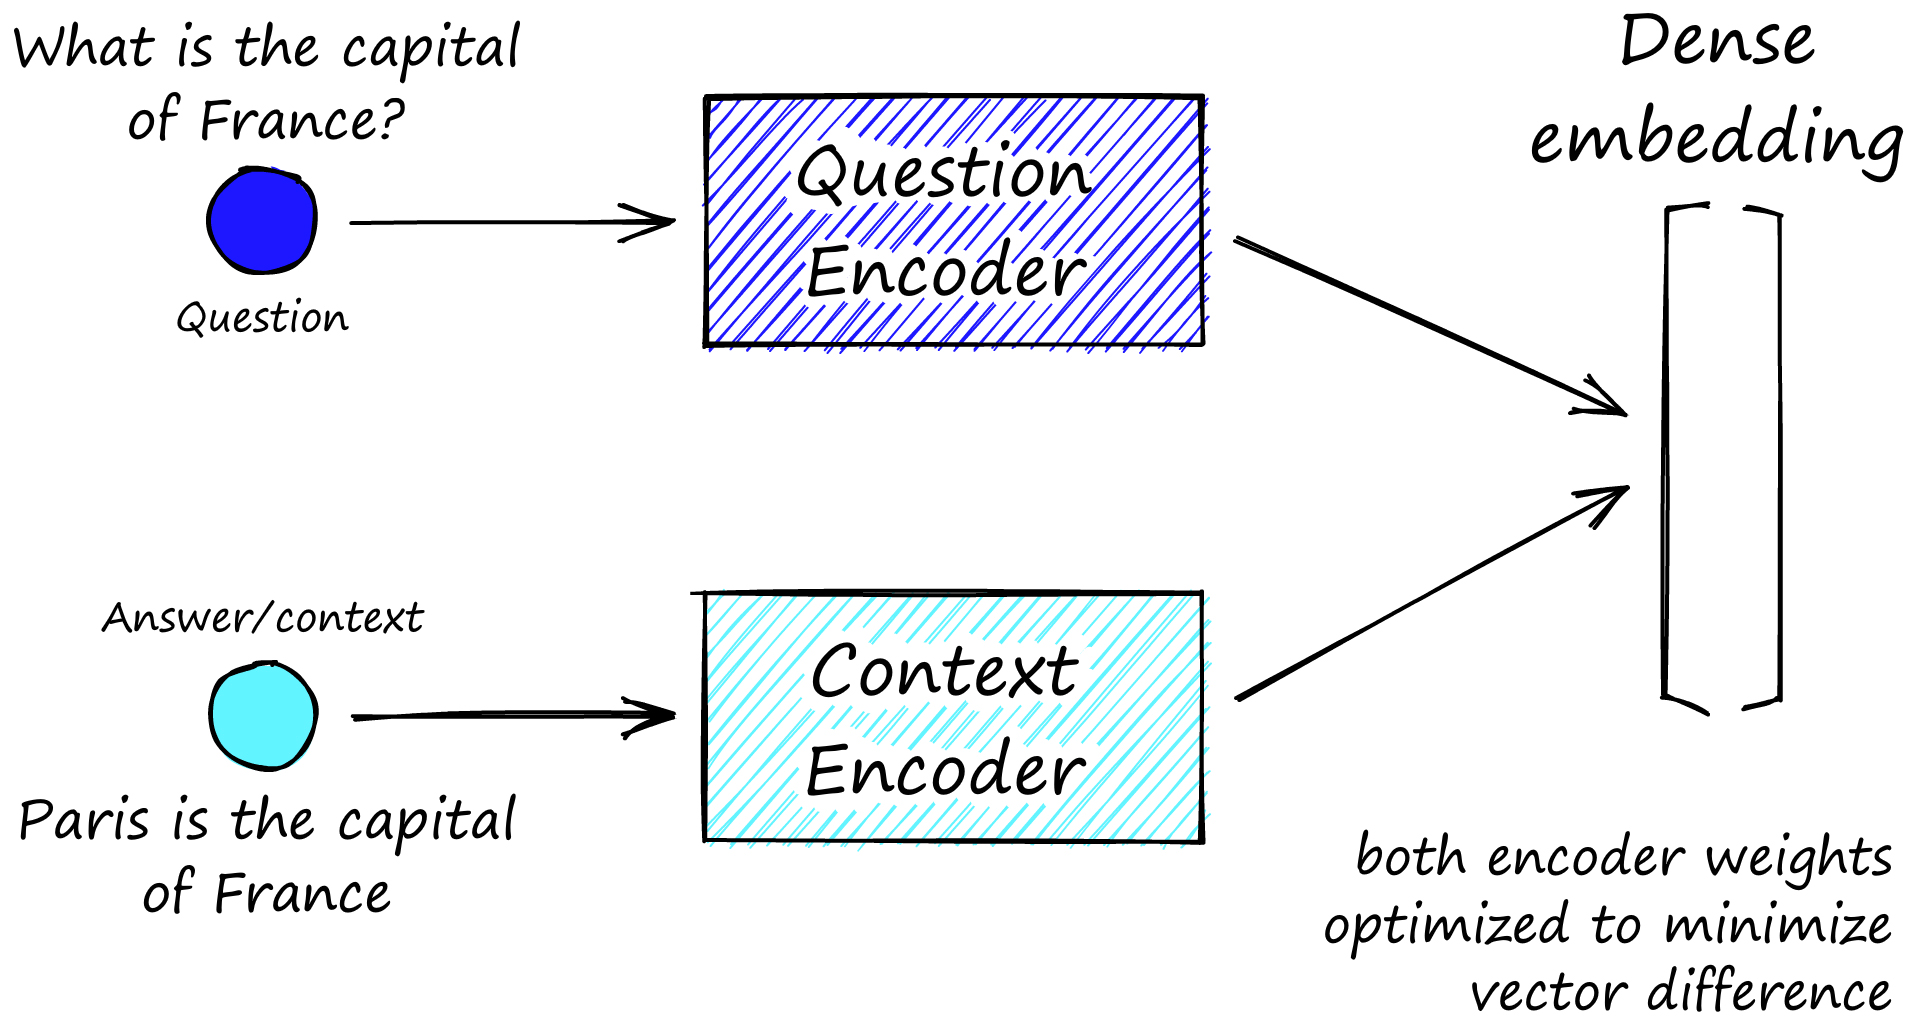 Bi-encoder structure of DPR, we have both a question encoder and a context encoder — both are optimized to output the same (or close) embeddings for each question-context pair.